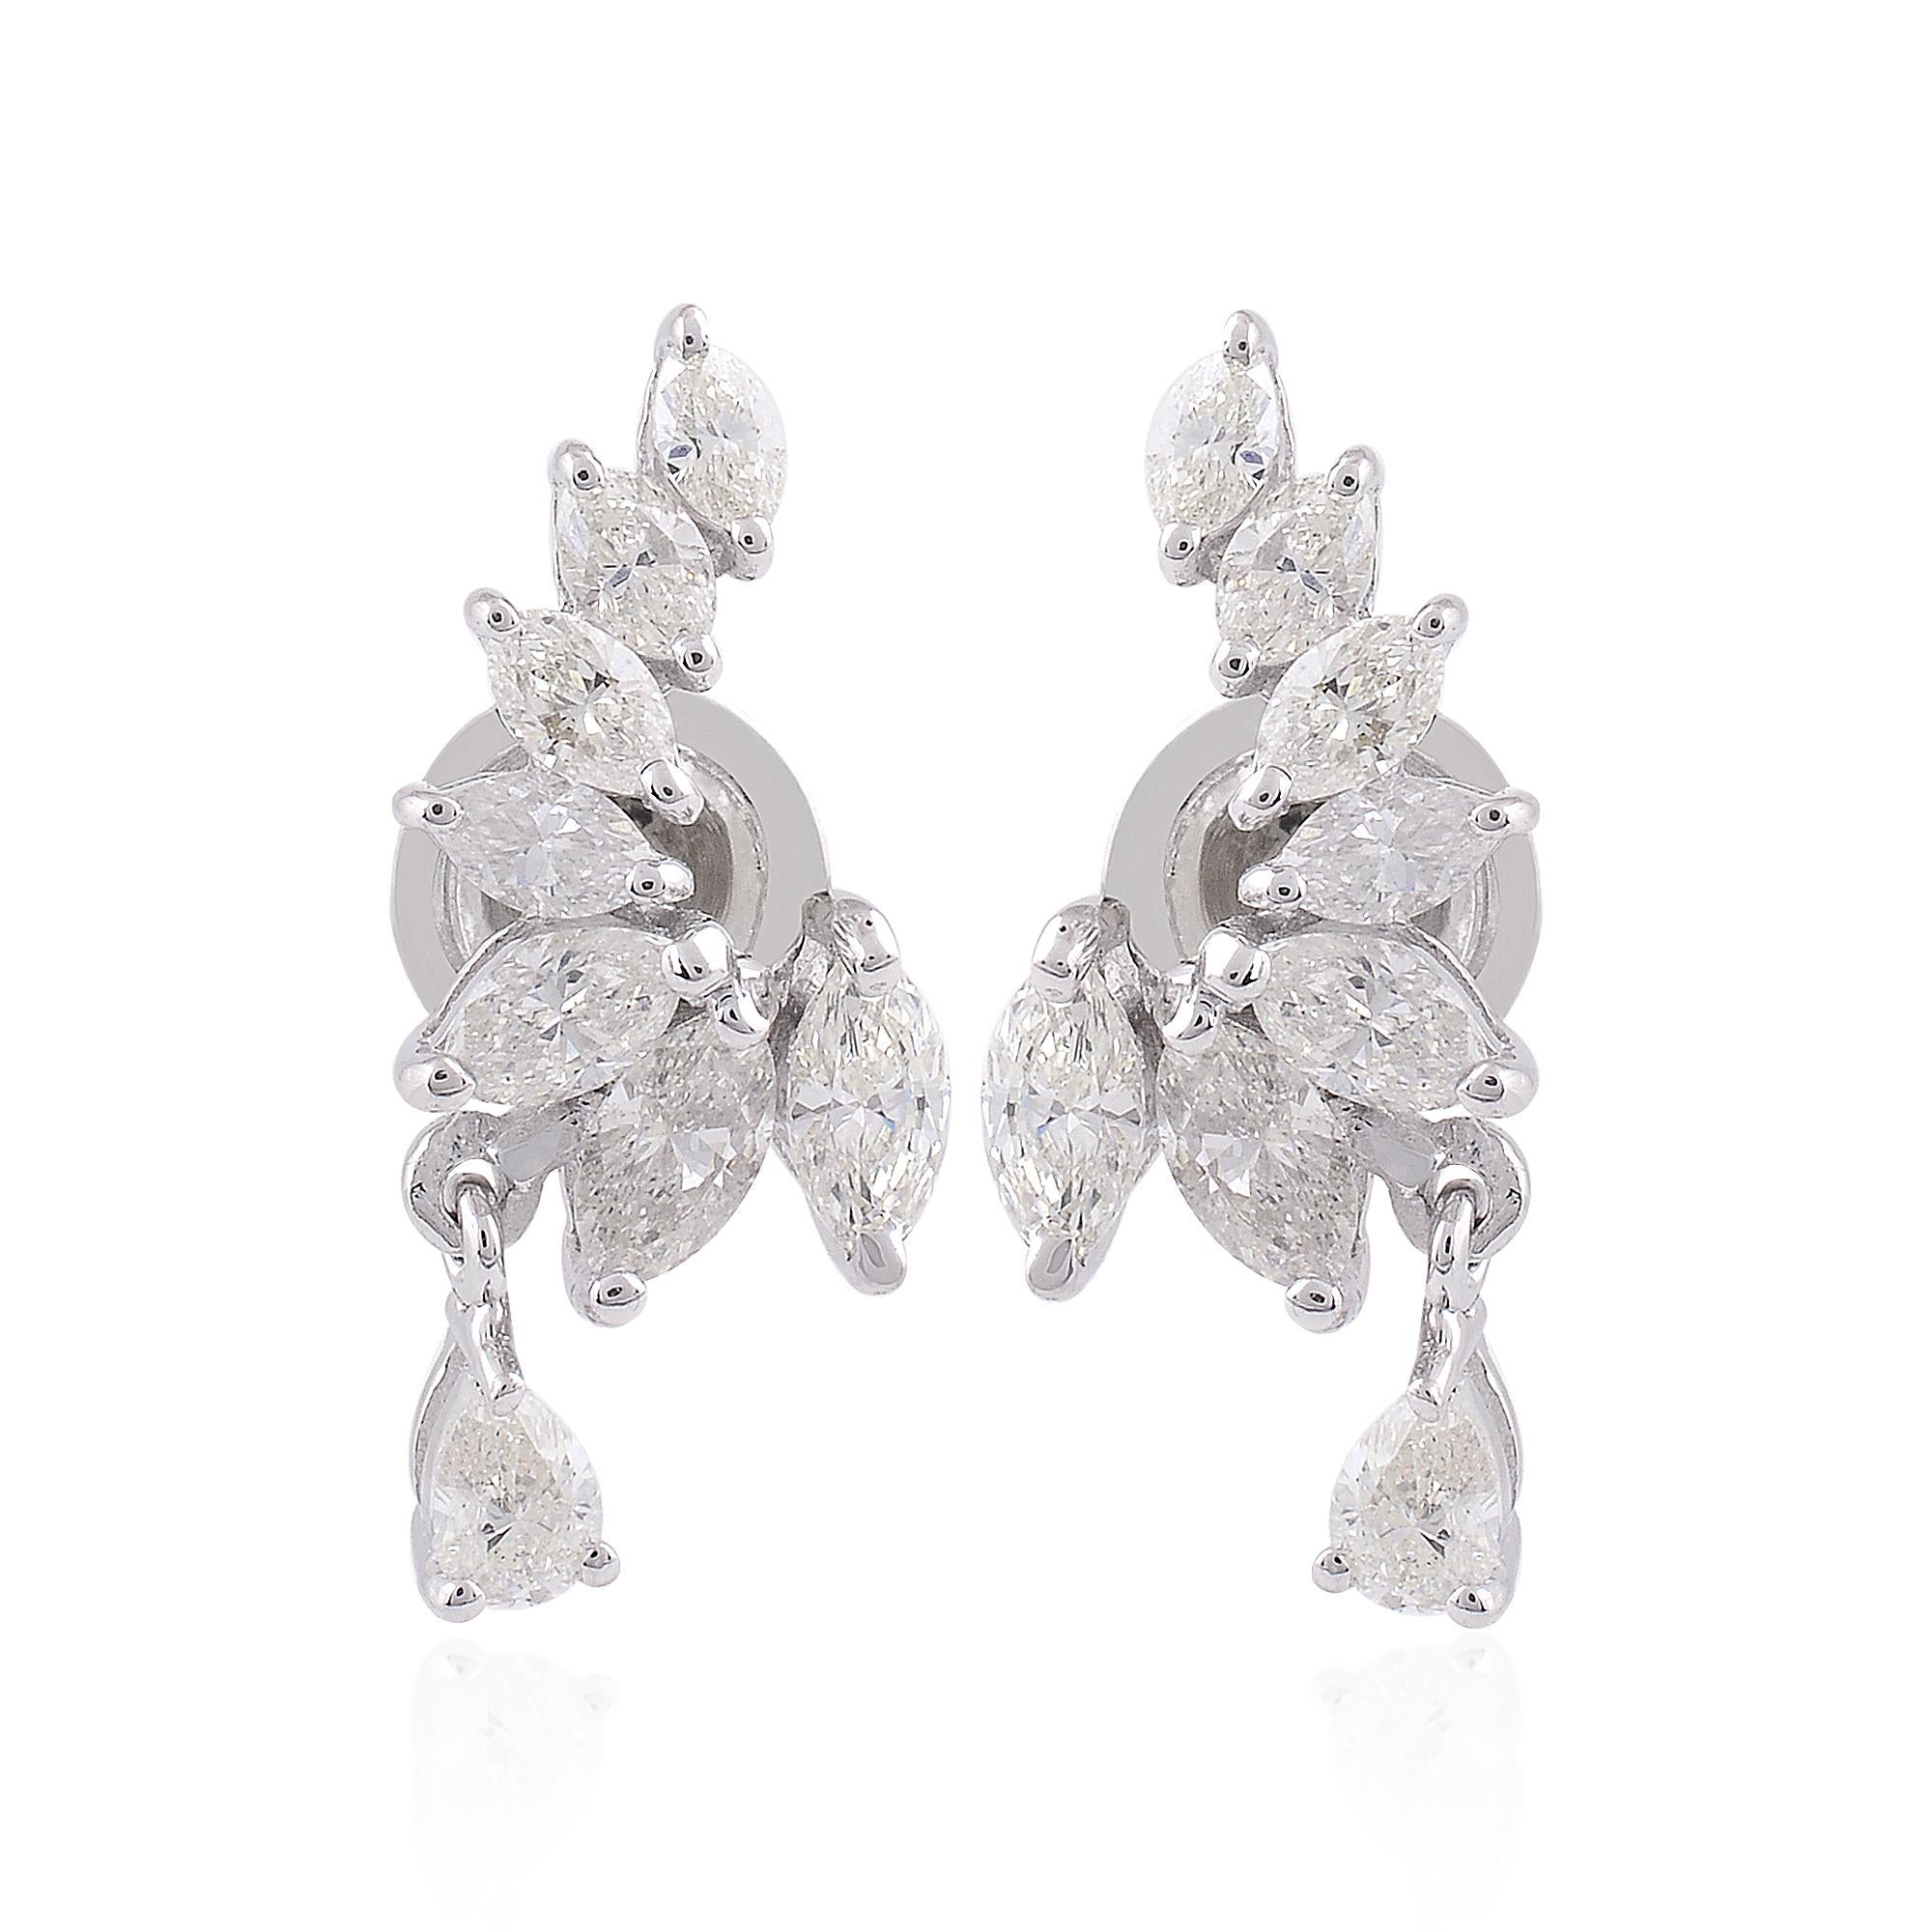 Item Code:- SEE-1359F
Gross Weight :- 4.14 gm
18k White Gold Weight :- 3.80 gm
Diamond Weight :- 1.70 ct. ( SI Clarity & HI Color )
Earrings Size :- 15 mm approx.
✦ Sizing
.....................
We can adjust most items to fit your sizing